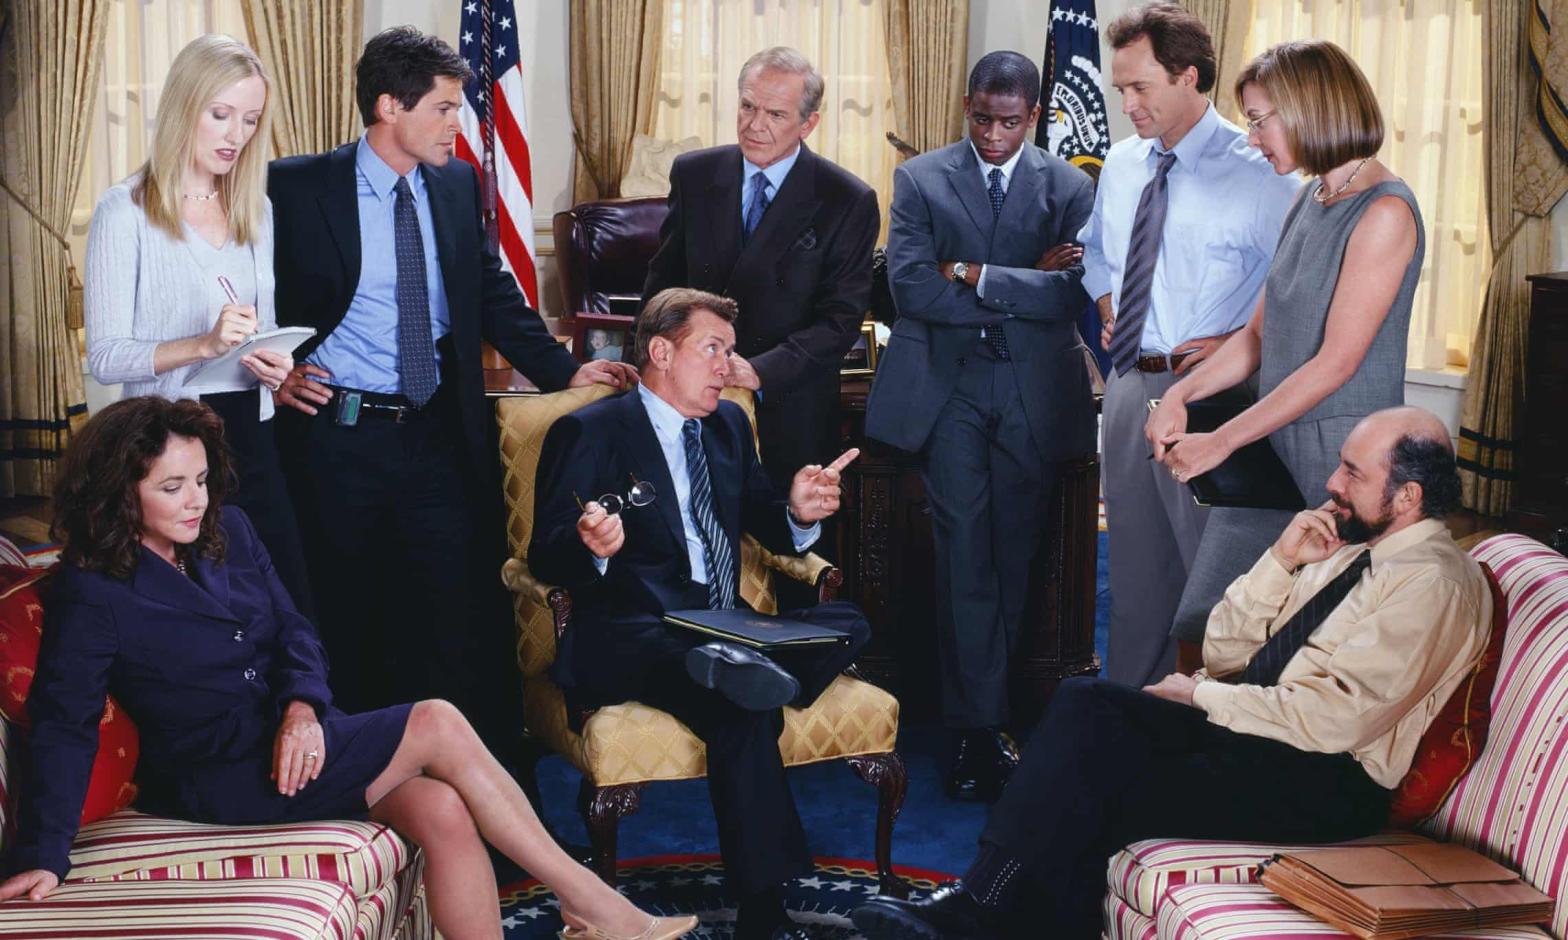 A photograph of the West Wing cast